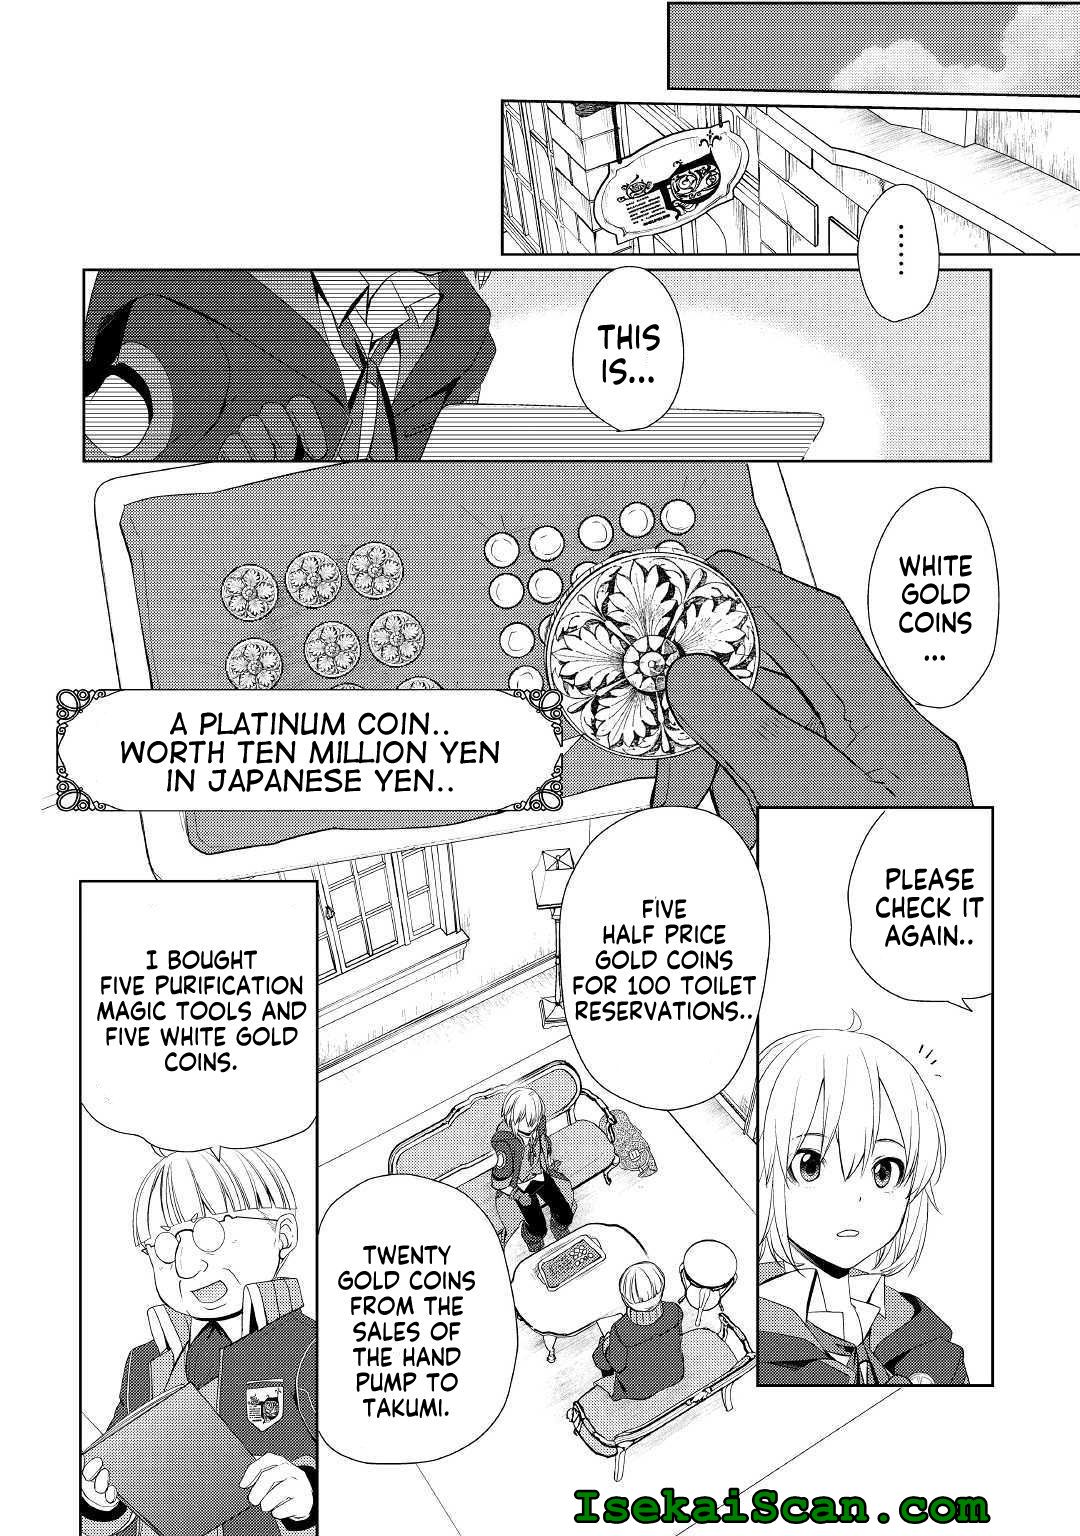 Someday Will I Be The Greatest Alchemist? - Page 2